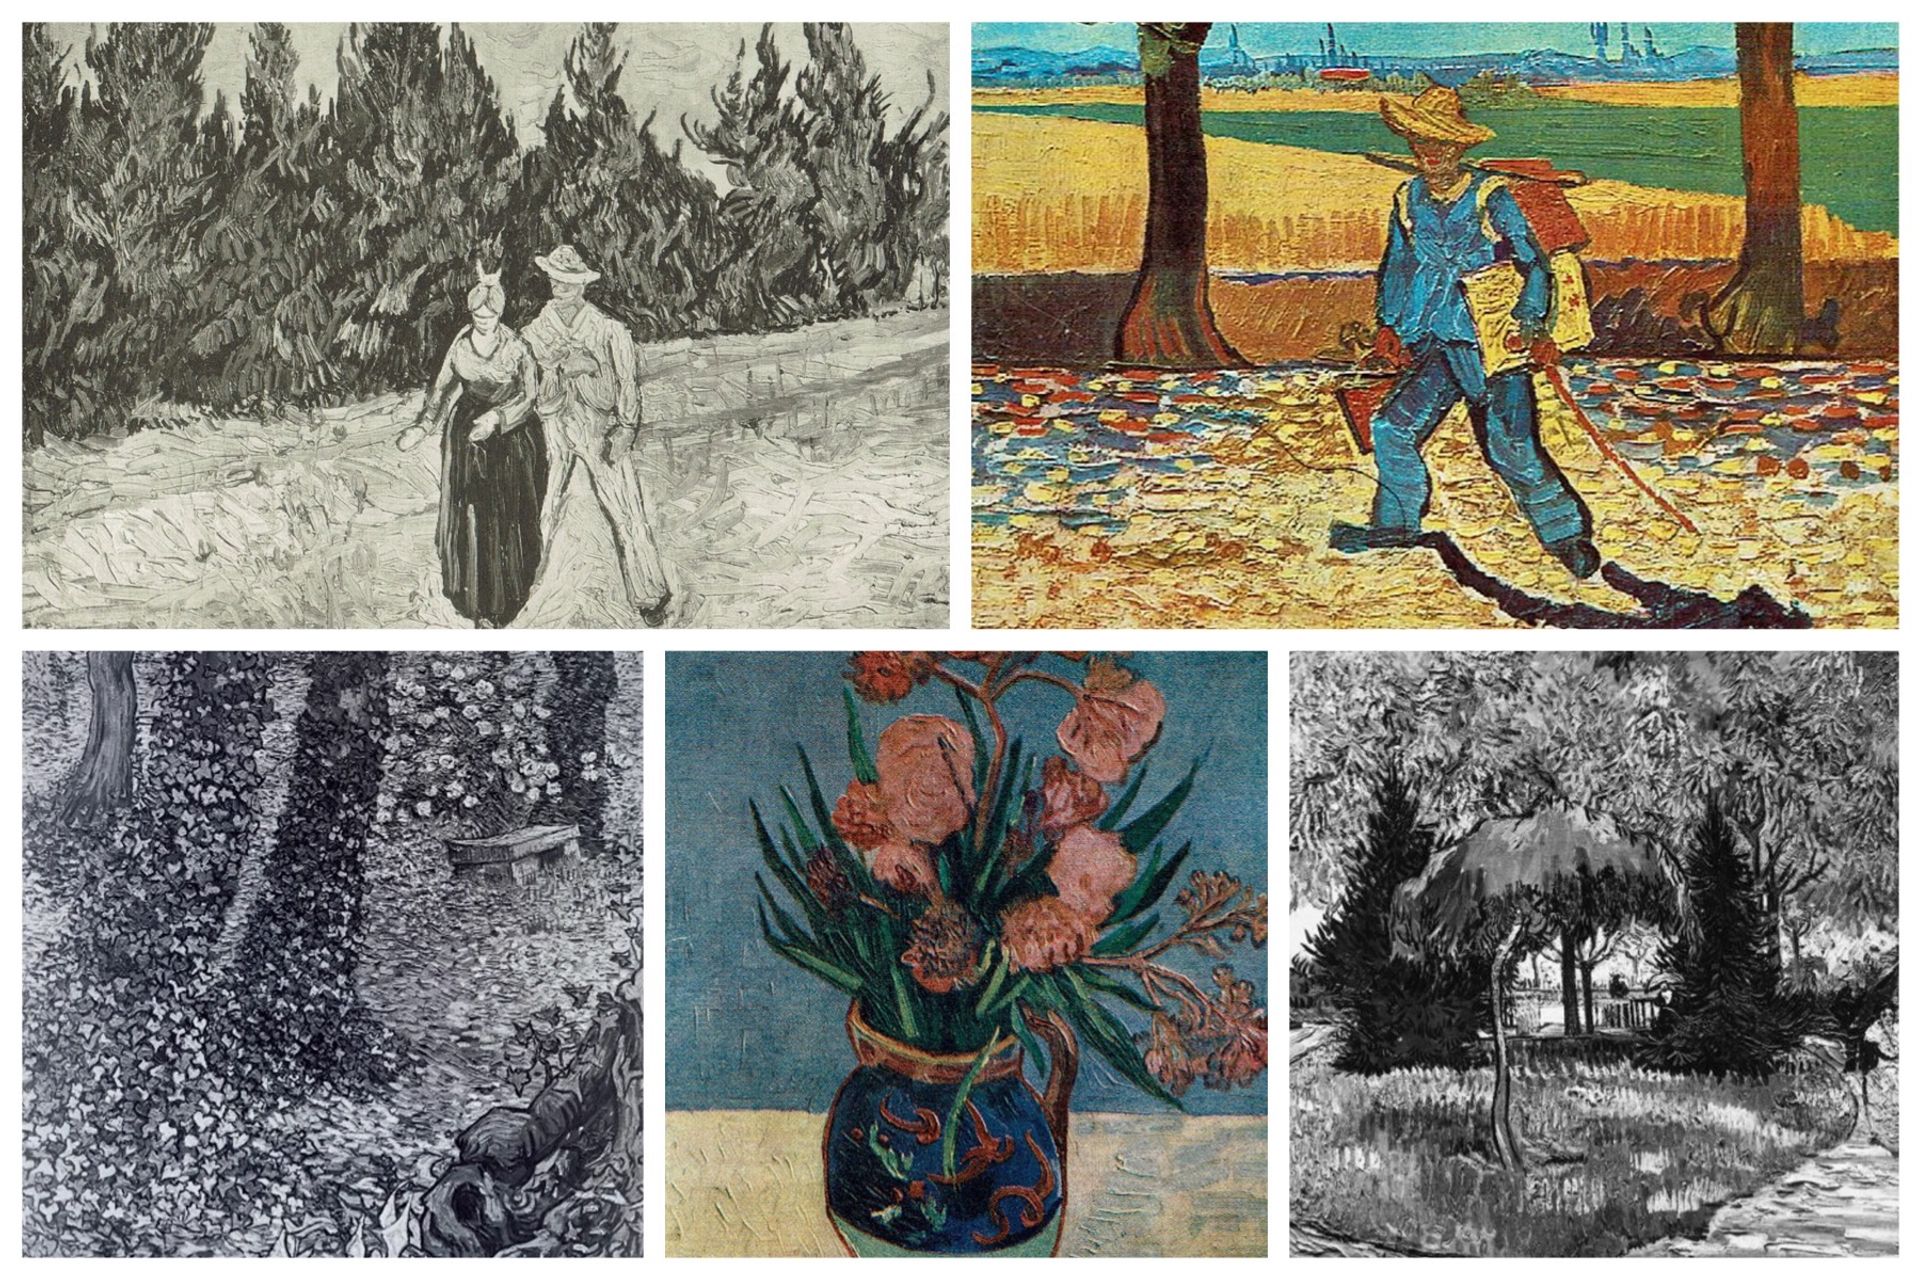 Check your attics for one of these missing Van Gogh, which disappeared during the Second World War